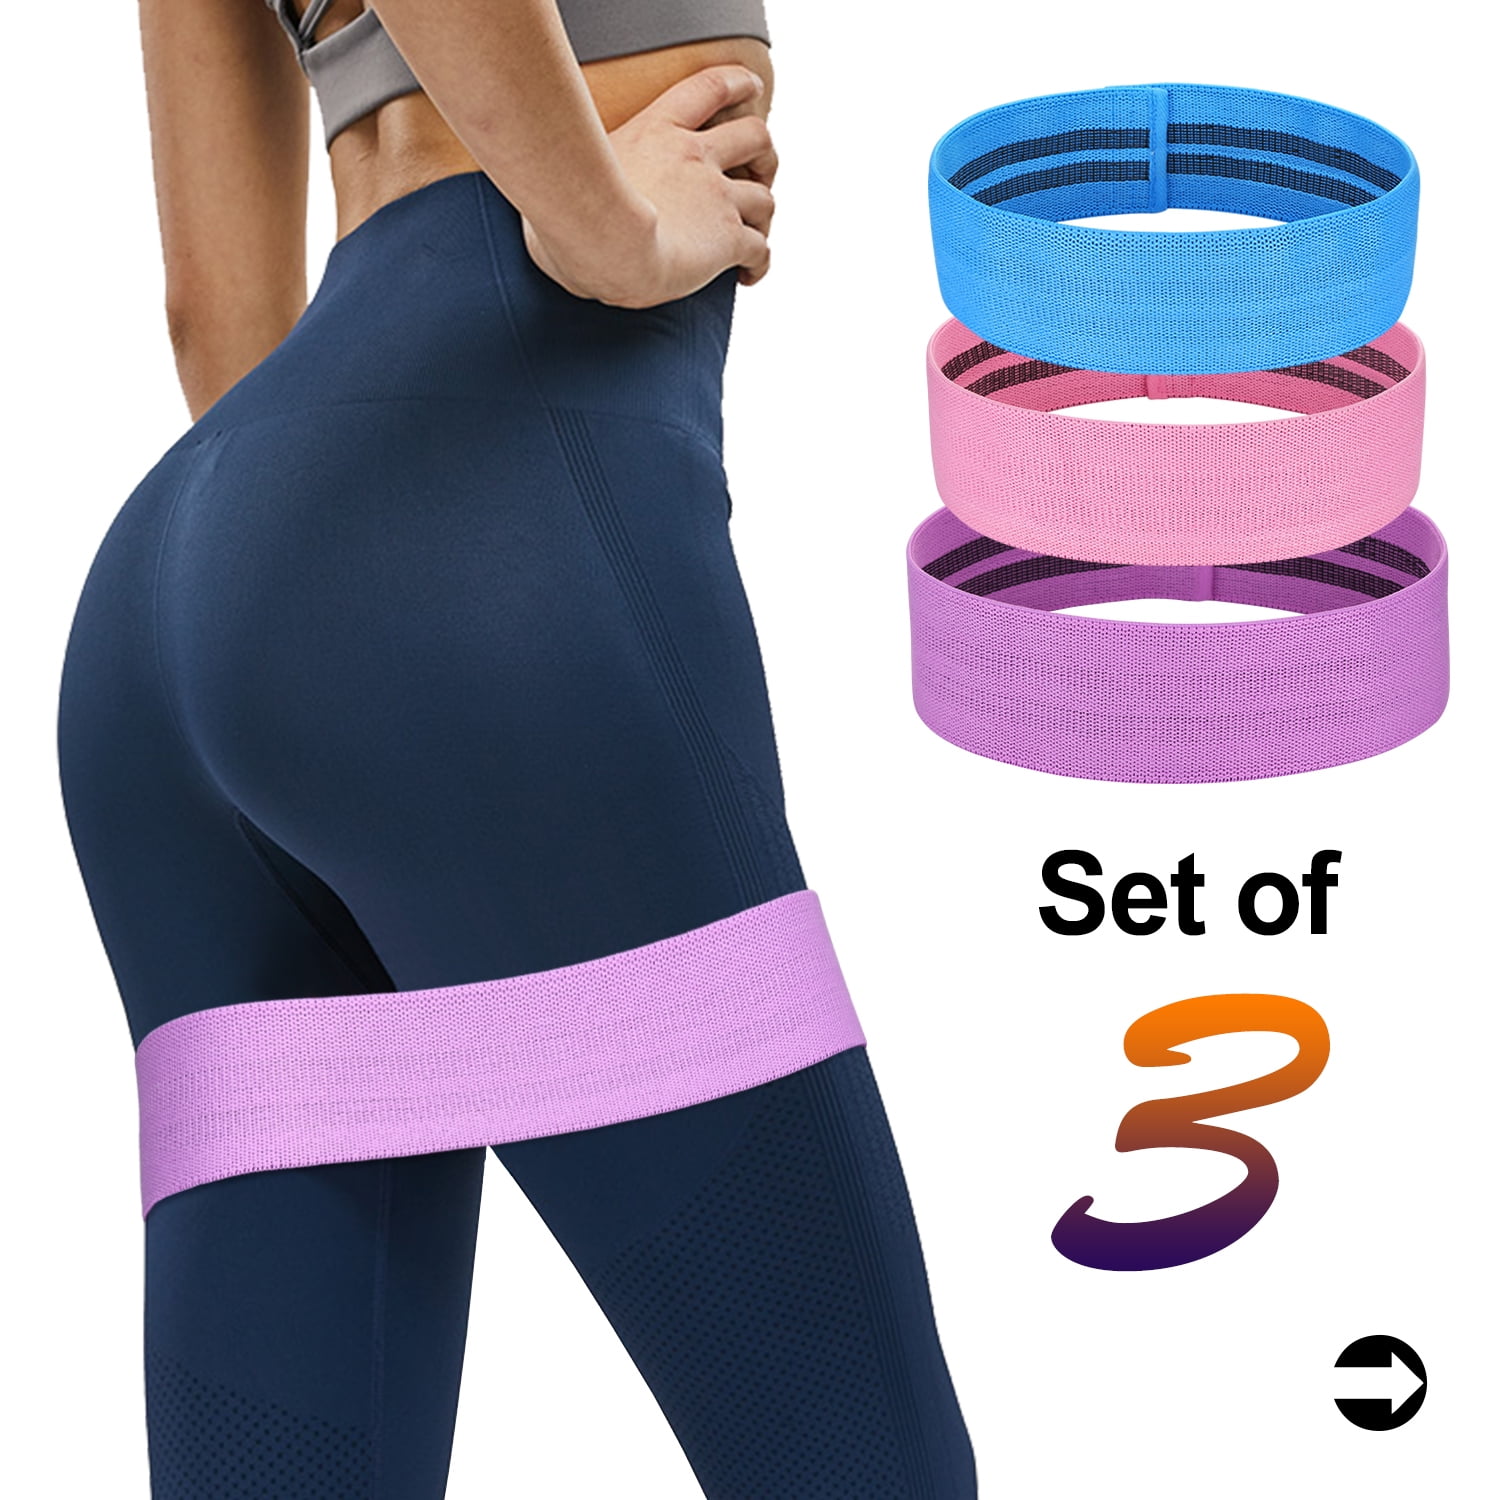 30 Minute Wristband for gym workout for Weight Loss